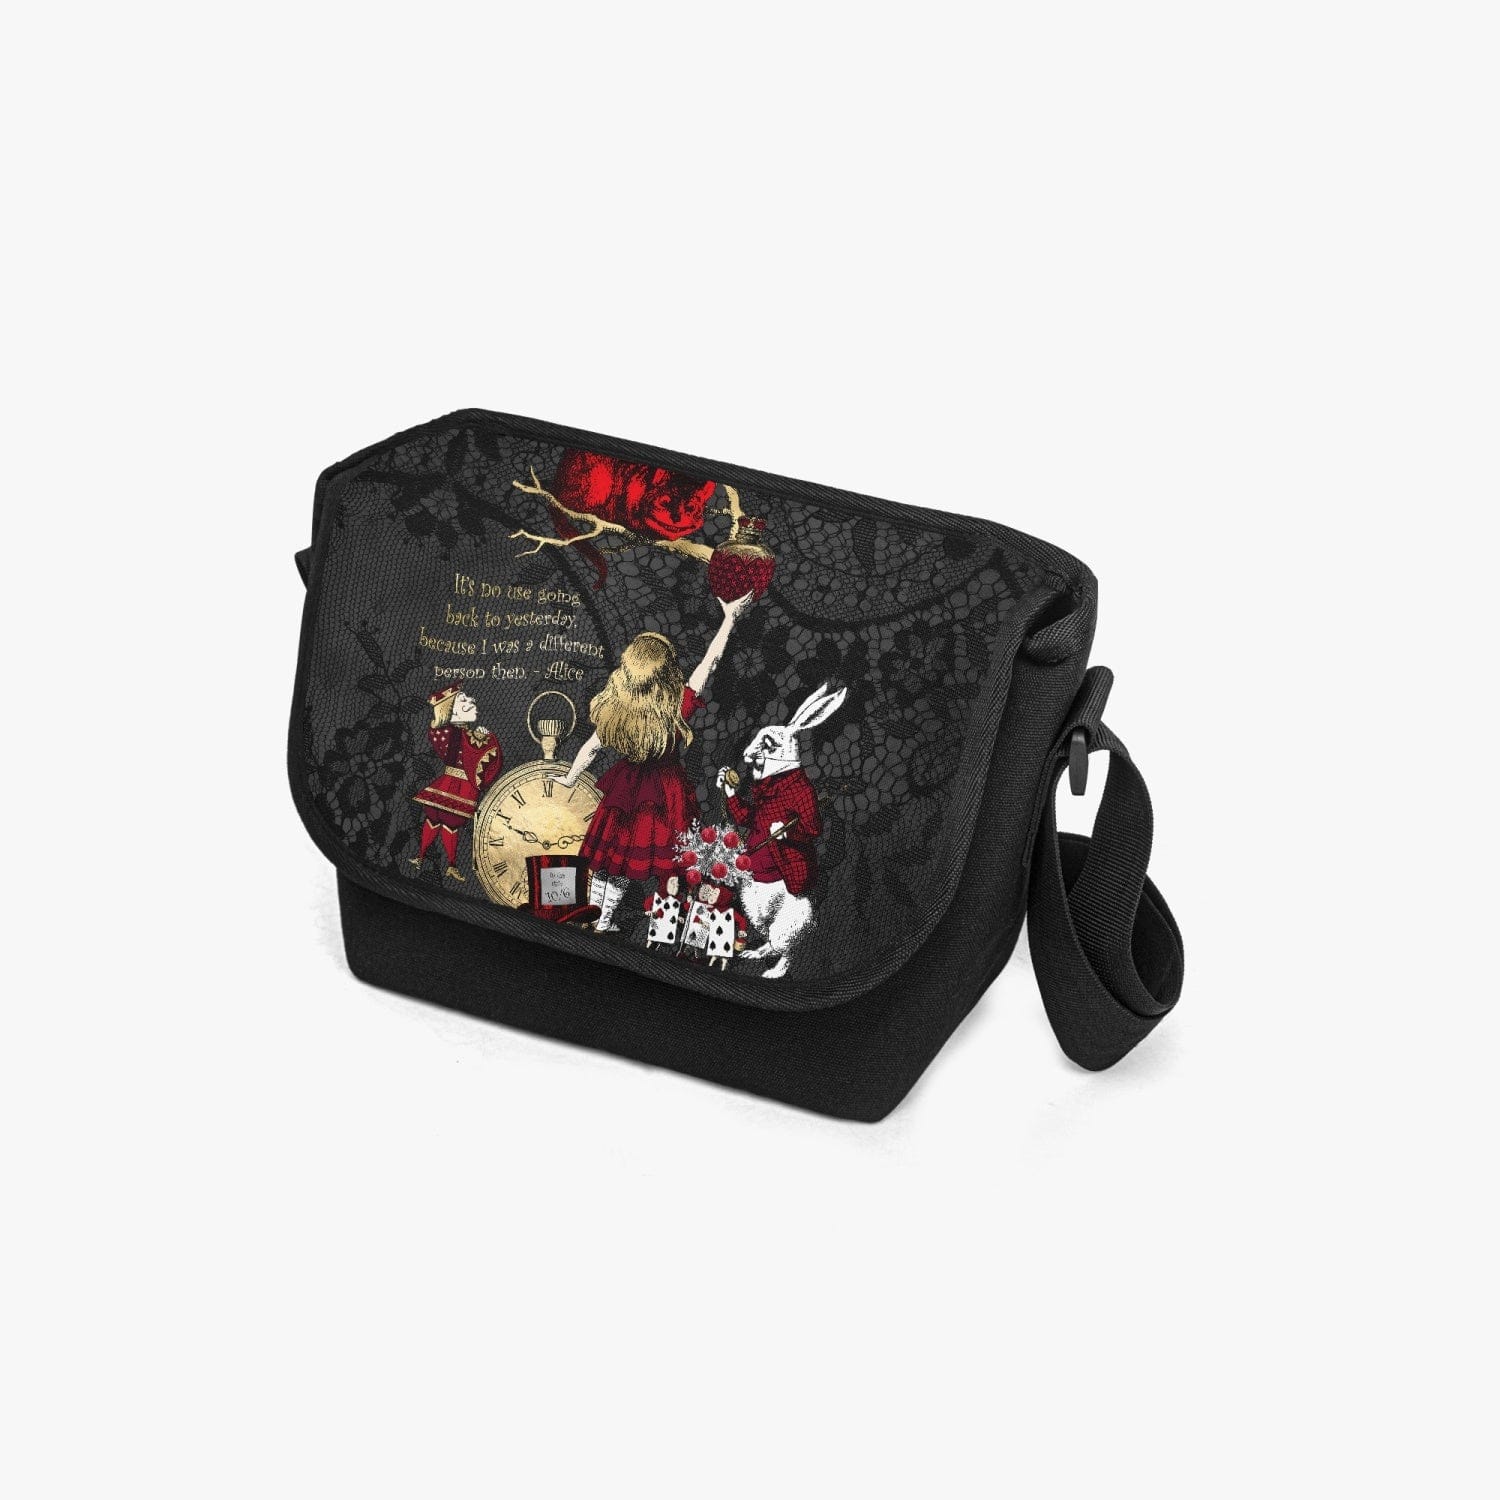 gothic Alice in Wonderland Messenger Bag made from canvas with a gothic gold, red and white Alice in Wonderland character print against a black lace print background